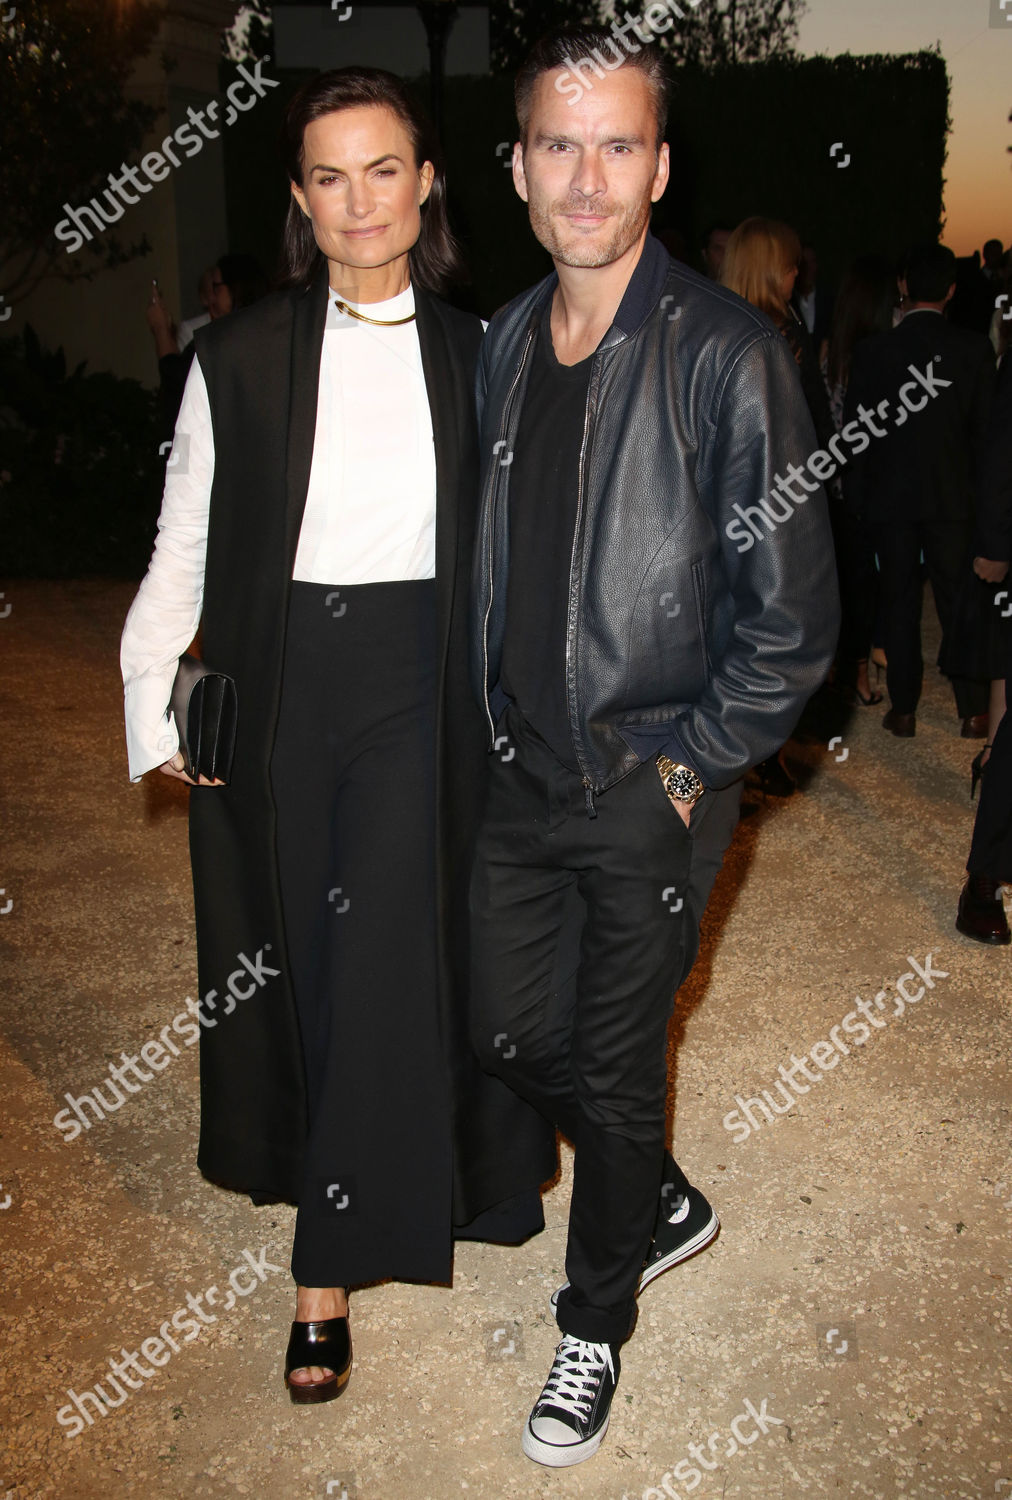 Balthazar Getty Wife Editorial Stock Photo - Stock Image | Shutterstock